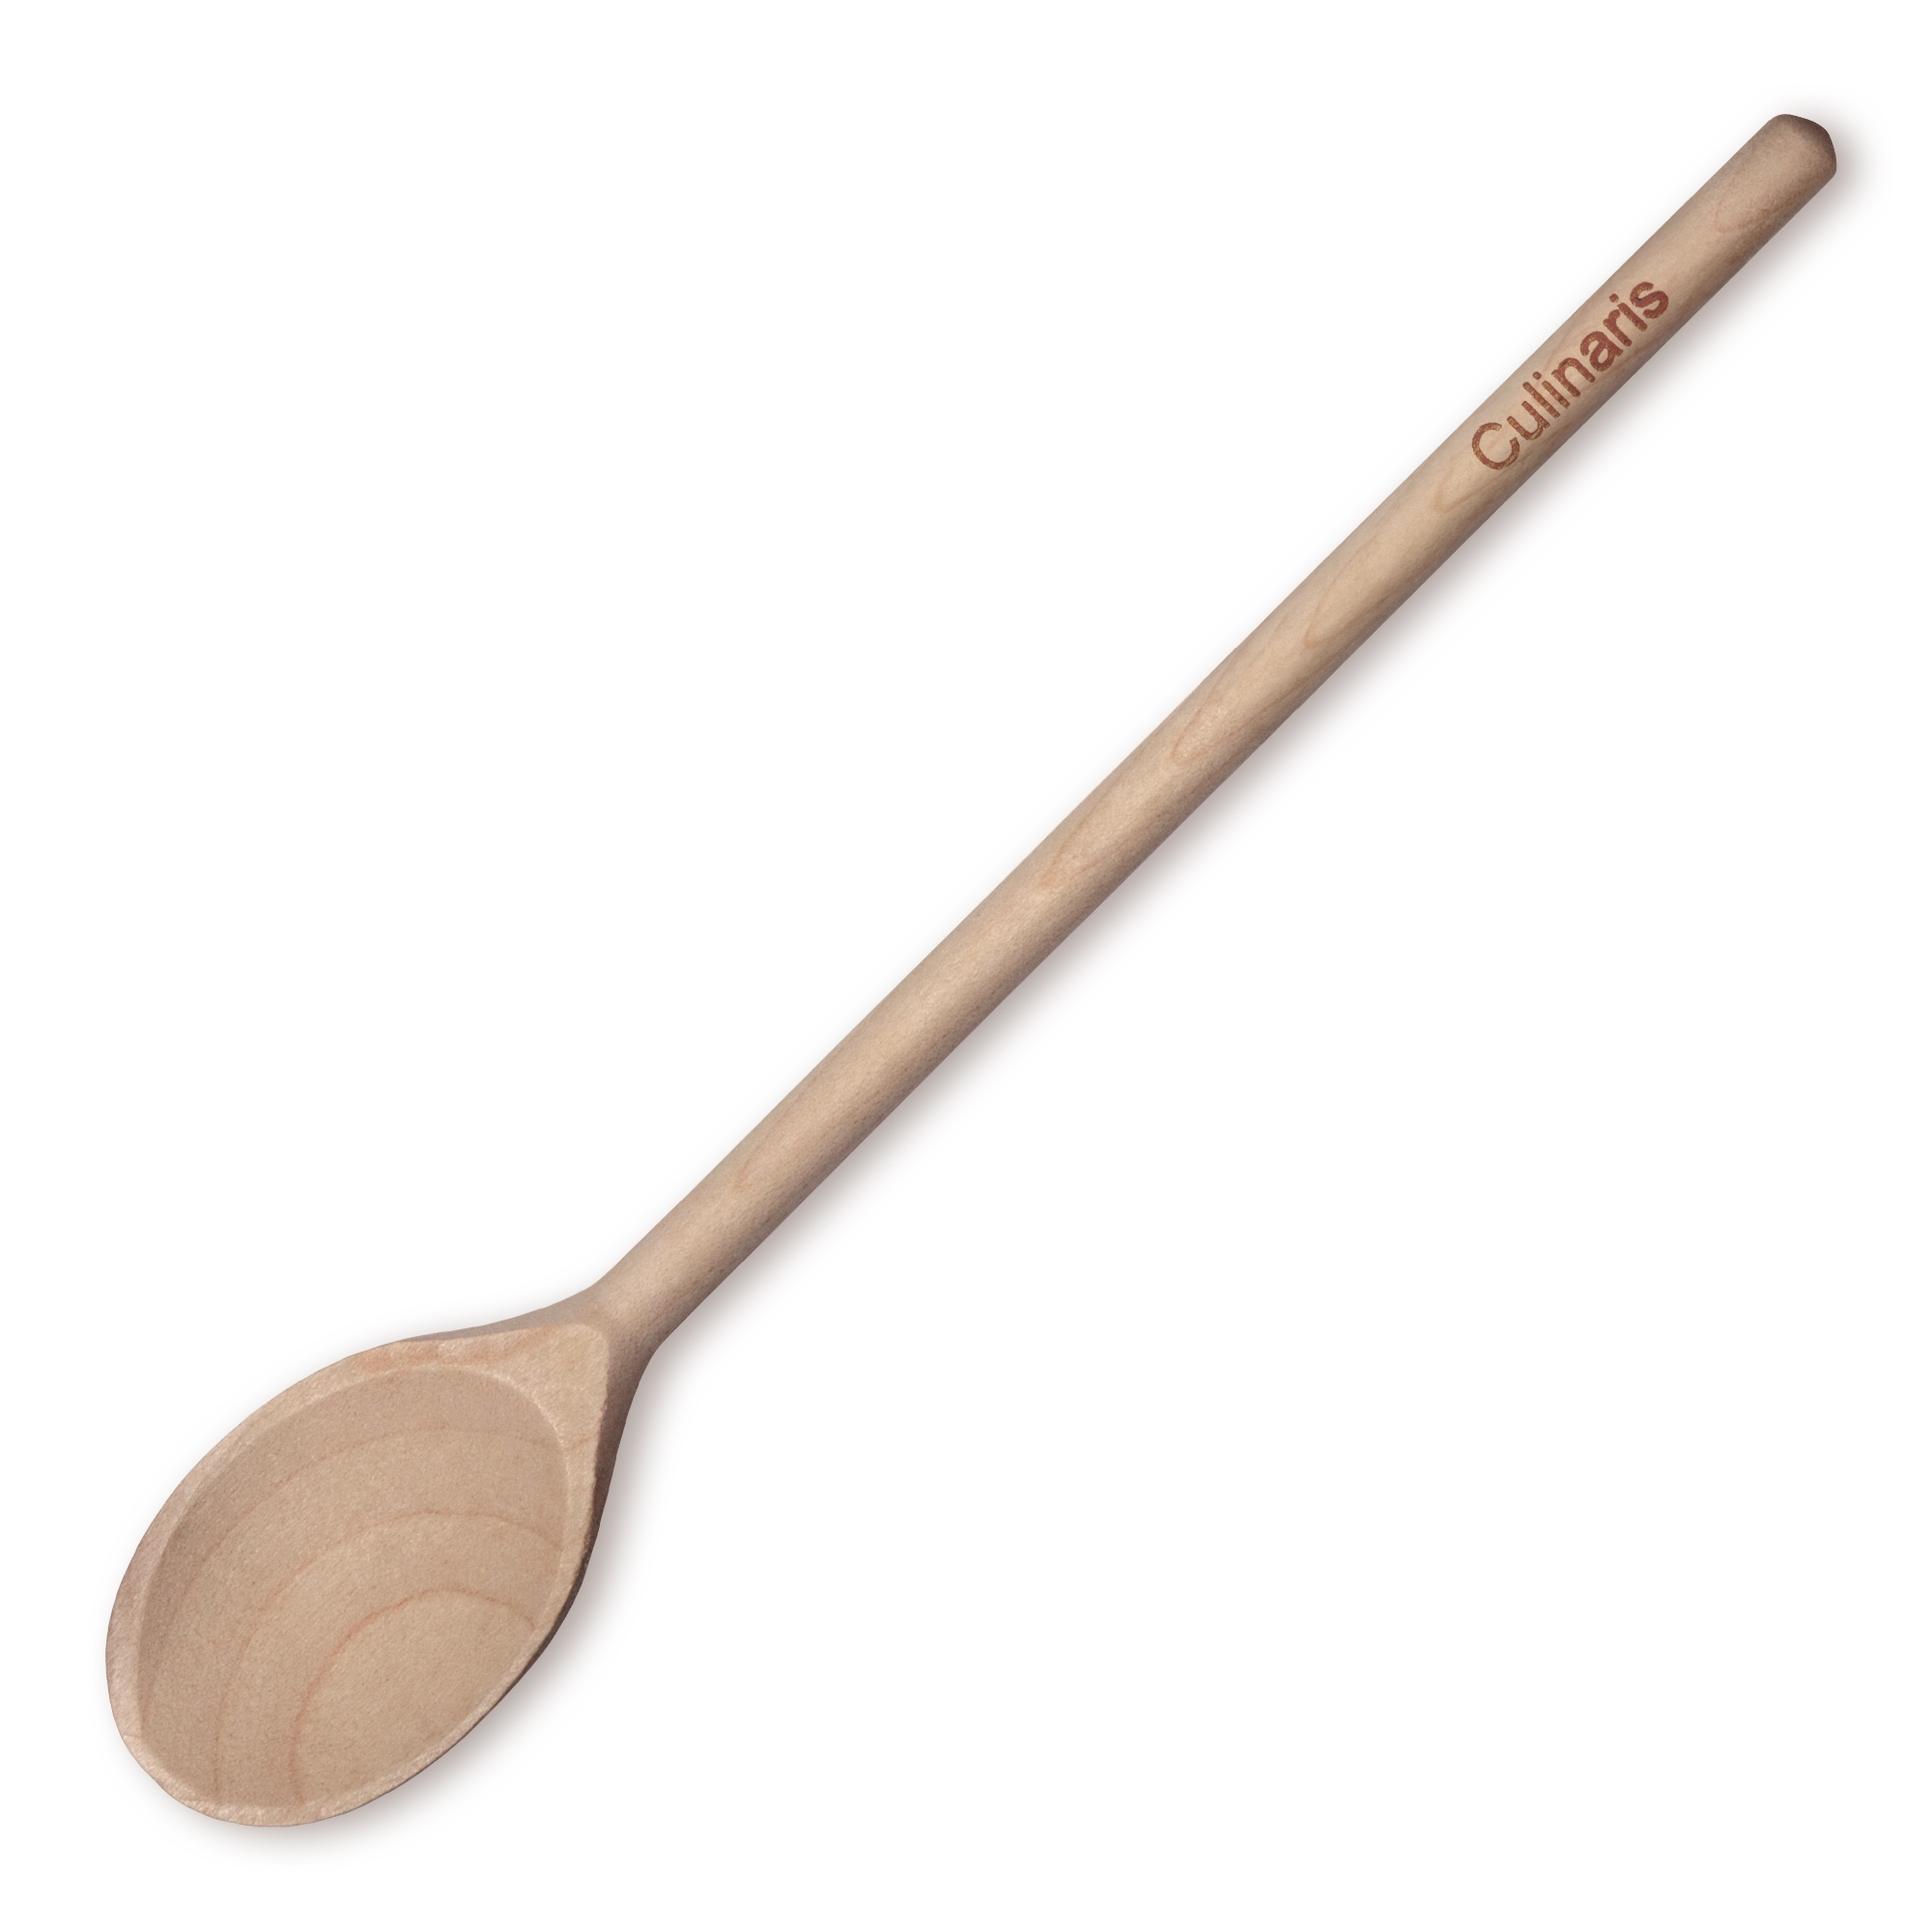 Culinaris - oval maple cooking spoon 25cm